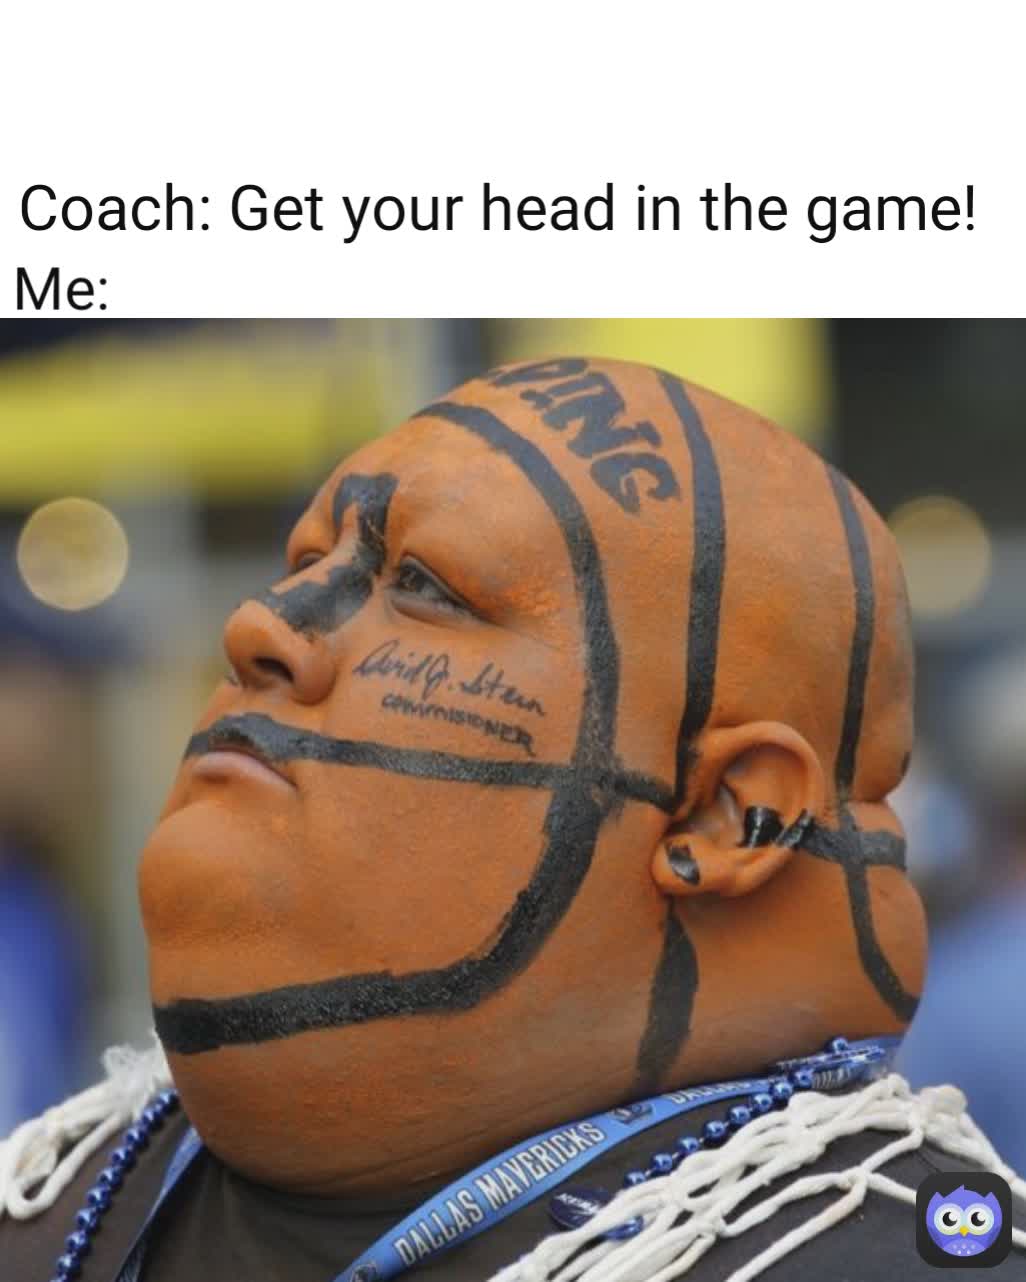 Me: Coach: Get your head in the game!